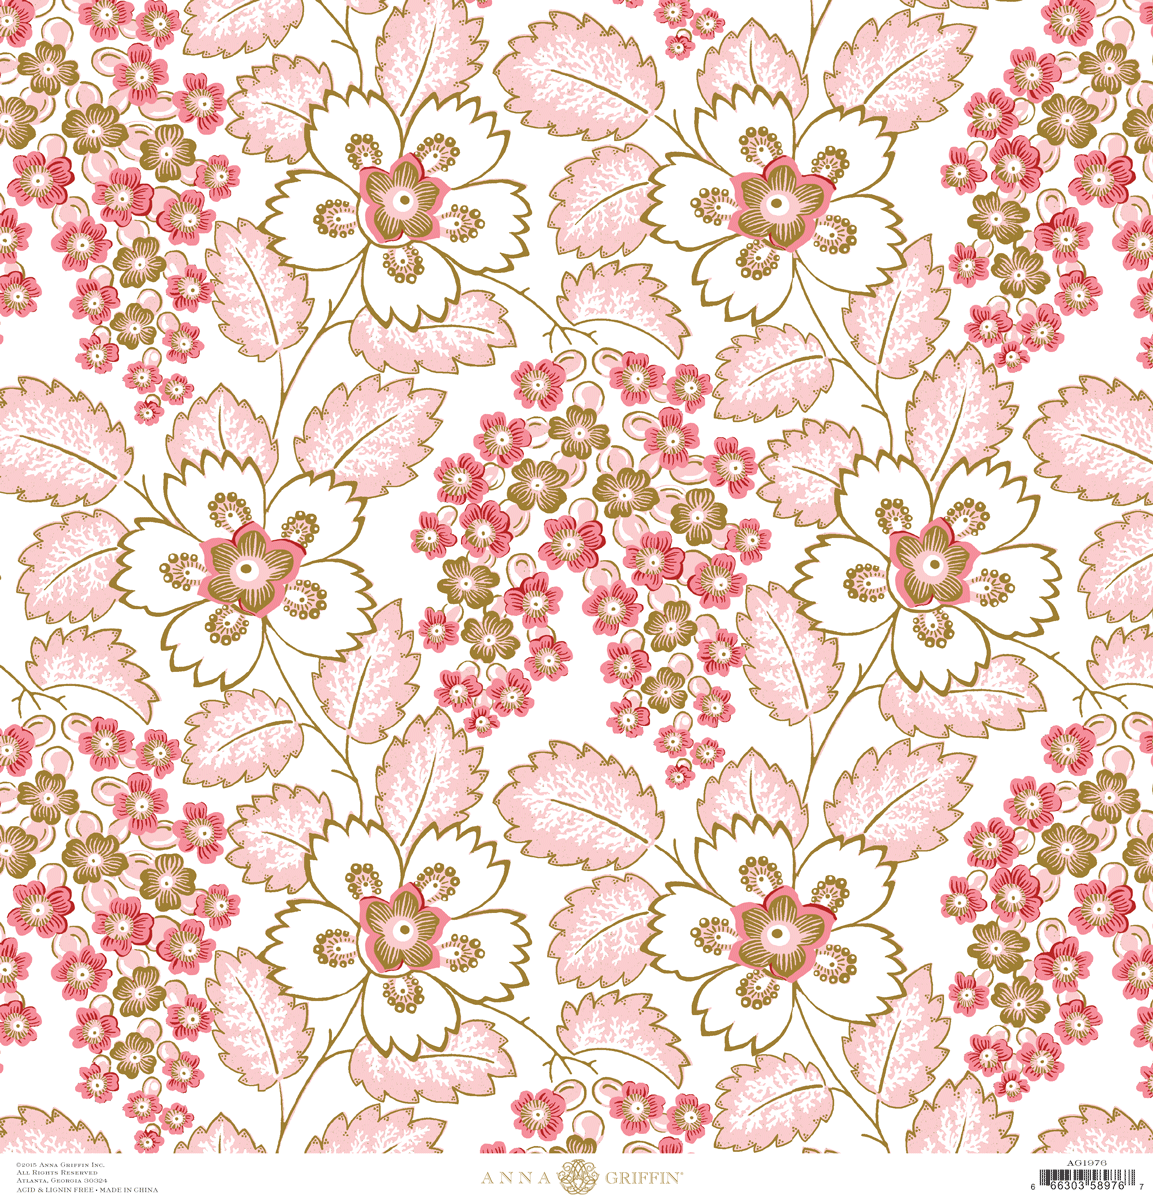 a pink and brown flower pattern on a white background.